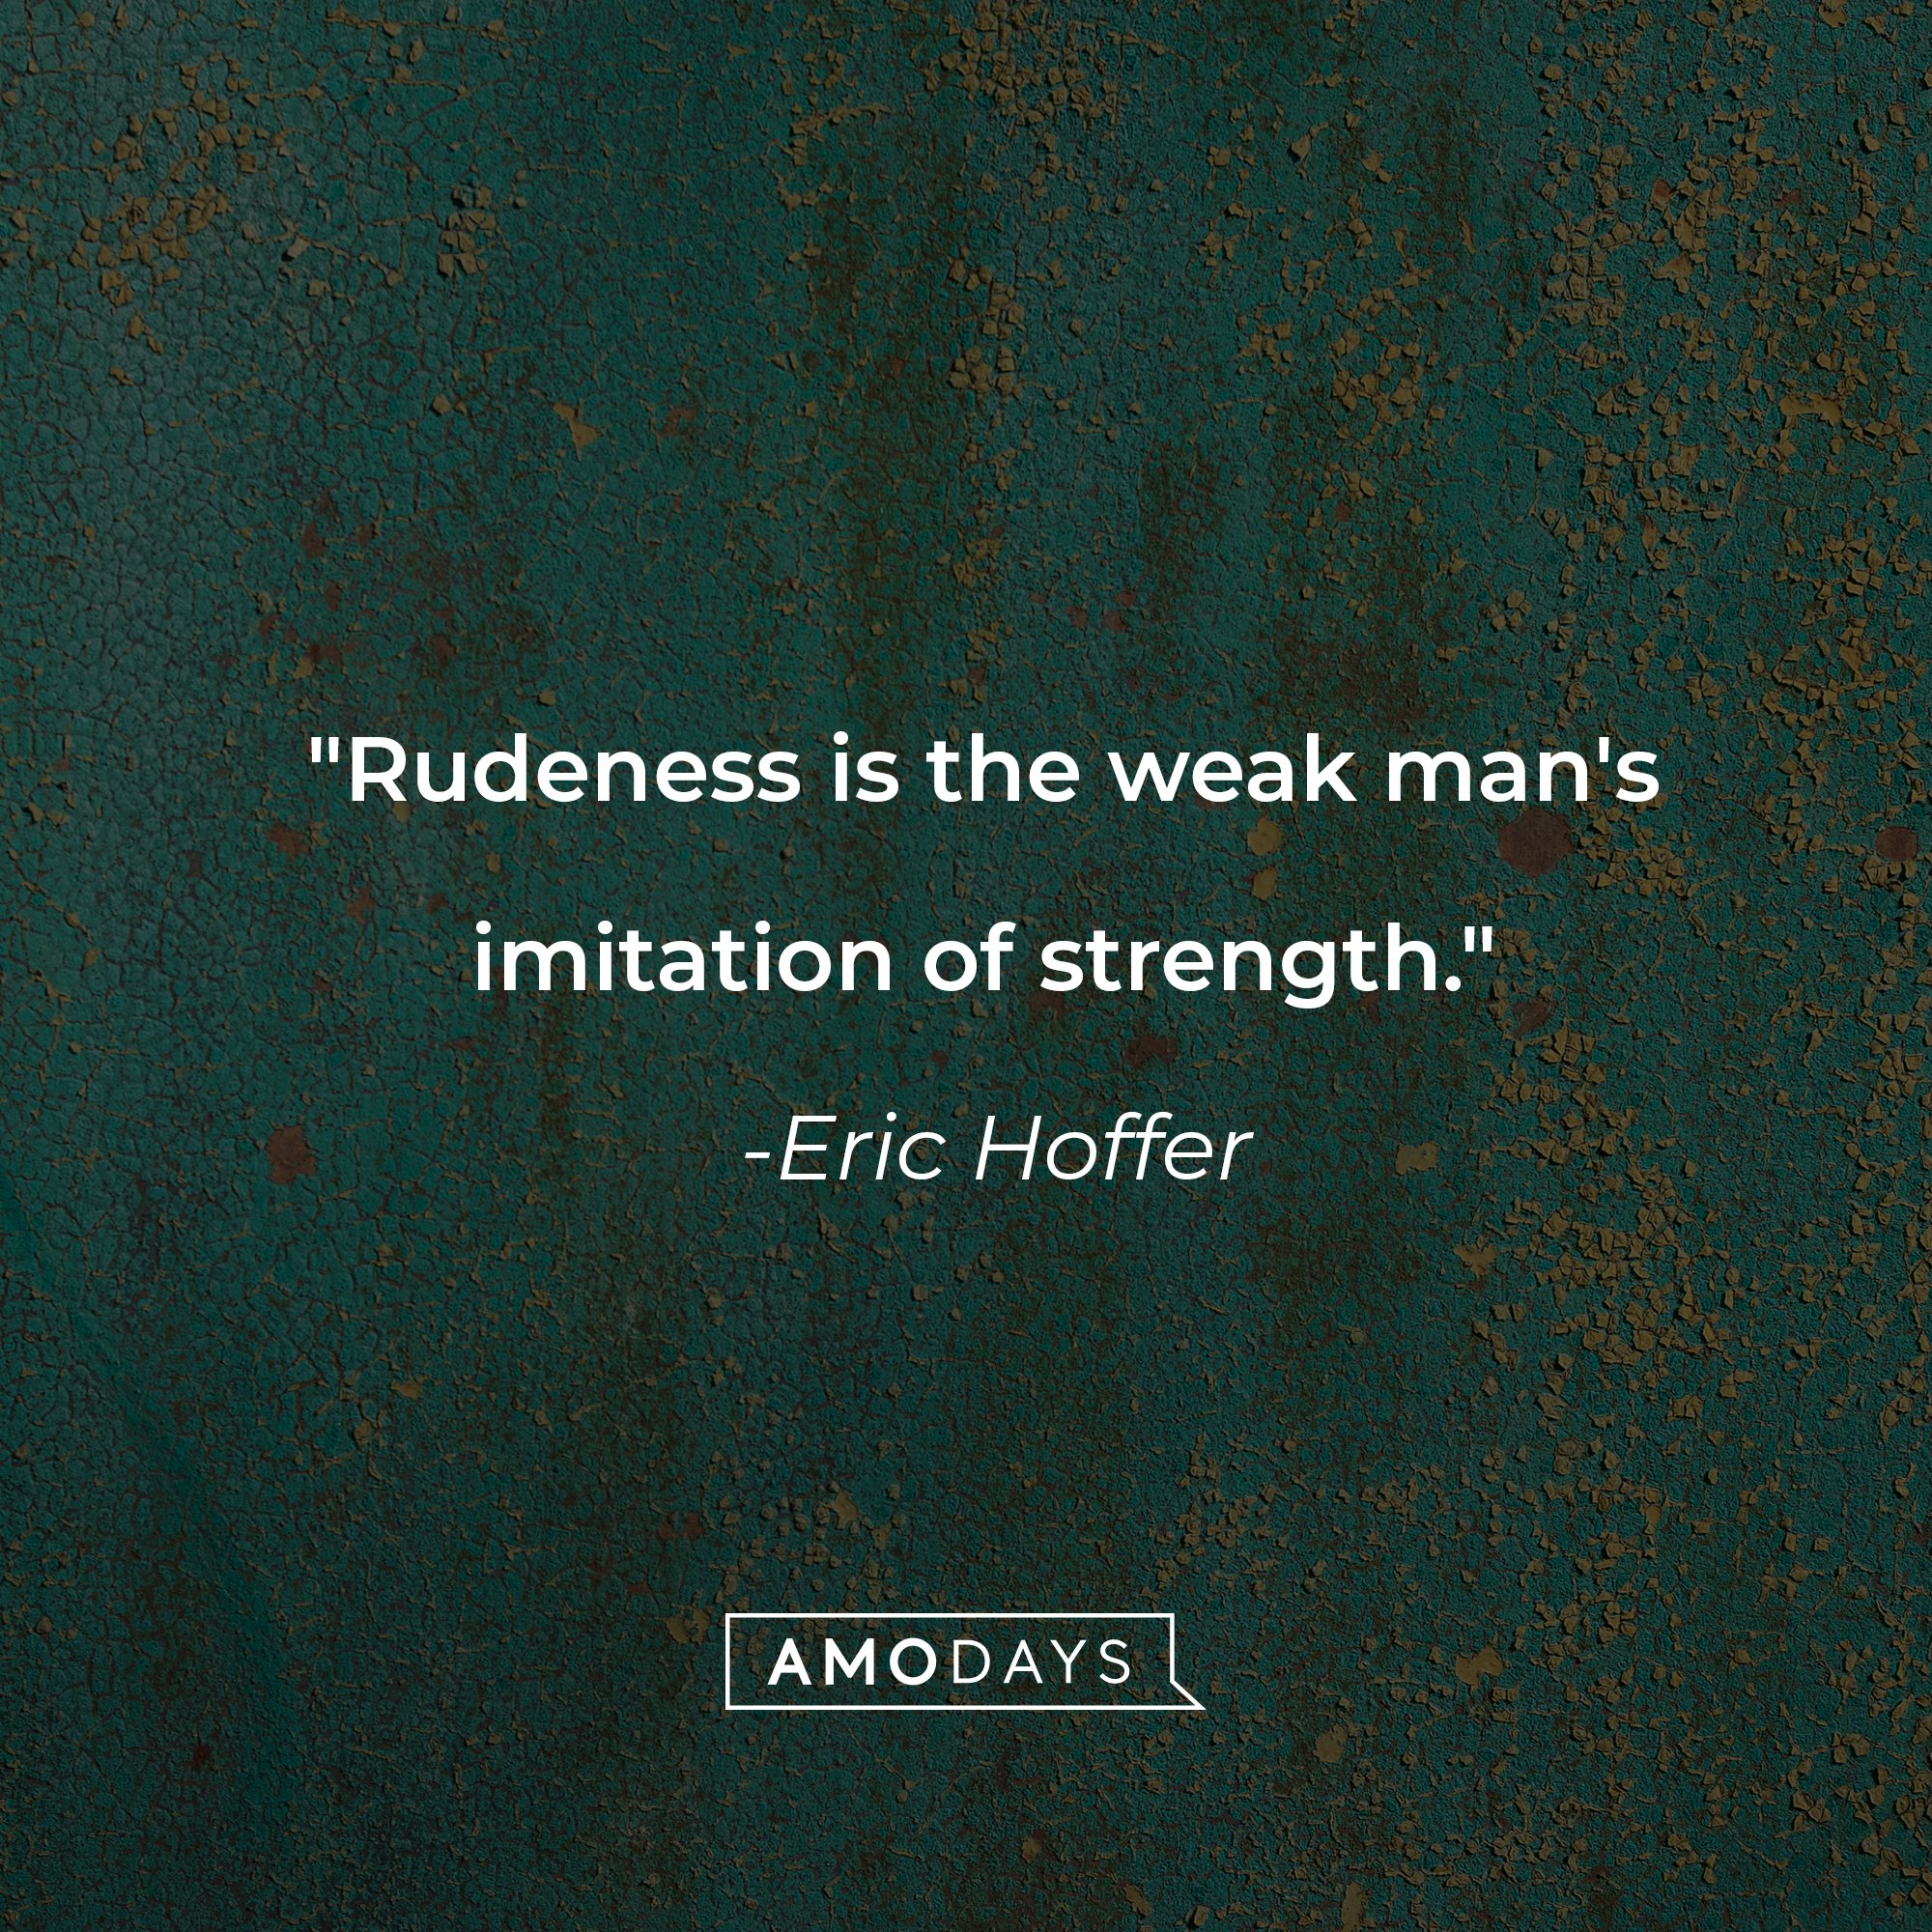 Eric Hoffer's quote: "Rudeness is the weak man's imitation of strength." | Image: AmoDays